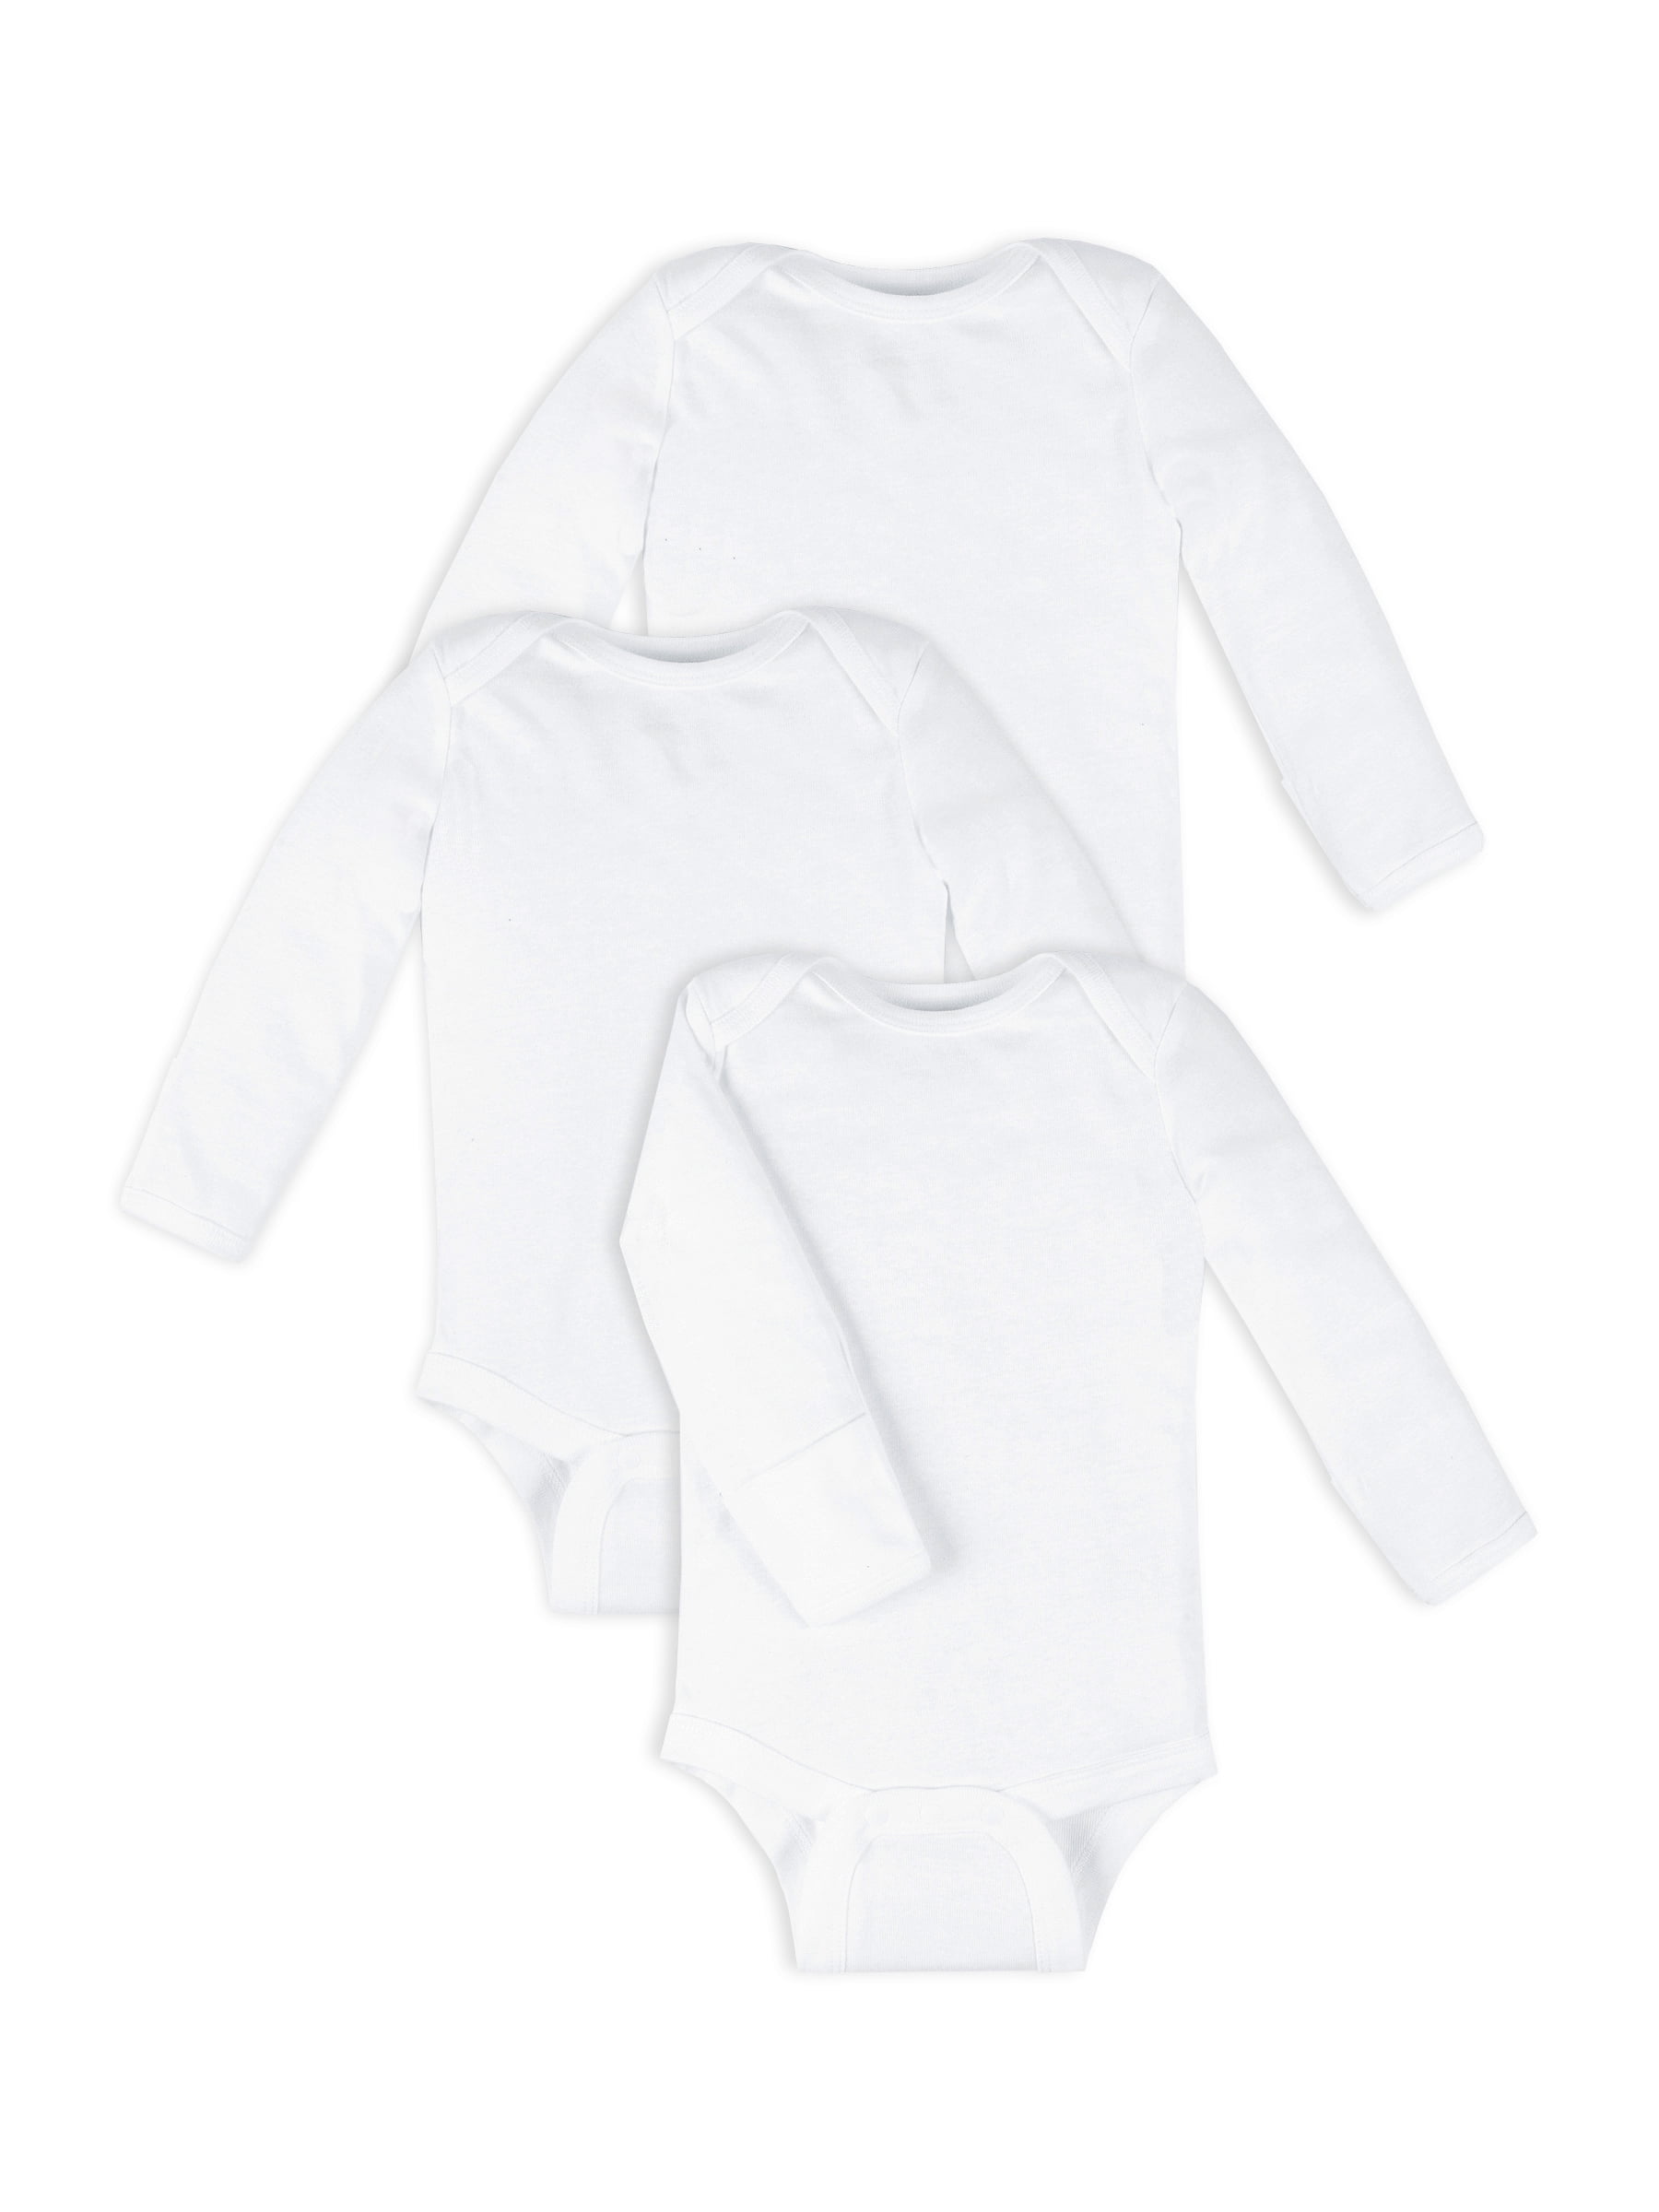 INFANT WHITE LONG SLEEVE T SHIRT MITTENS WRAP SIZE 6 MONTHS 